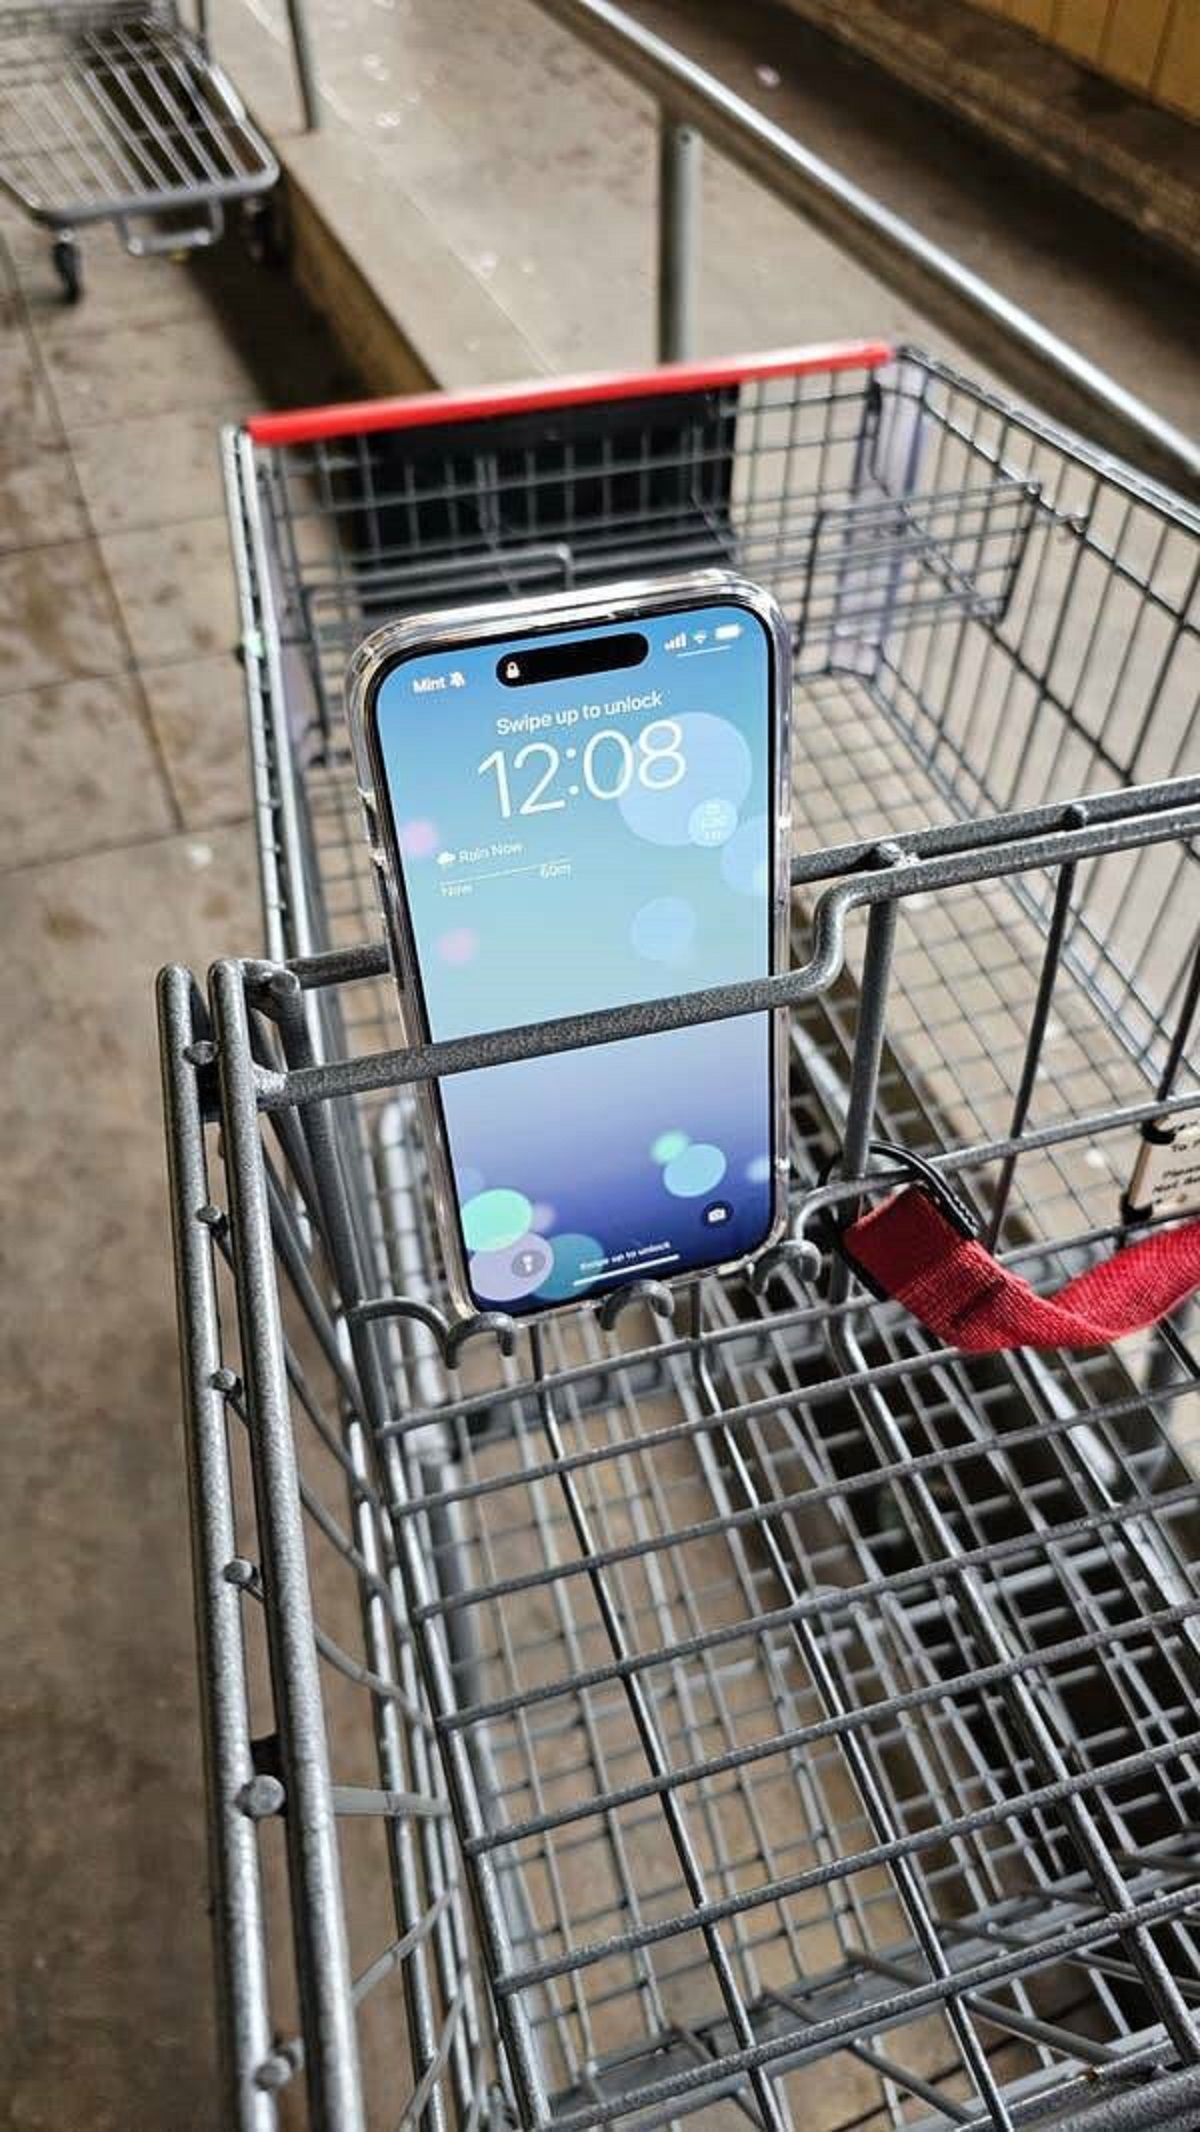 Some grocery carts have special little holders for your phone: